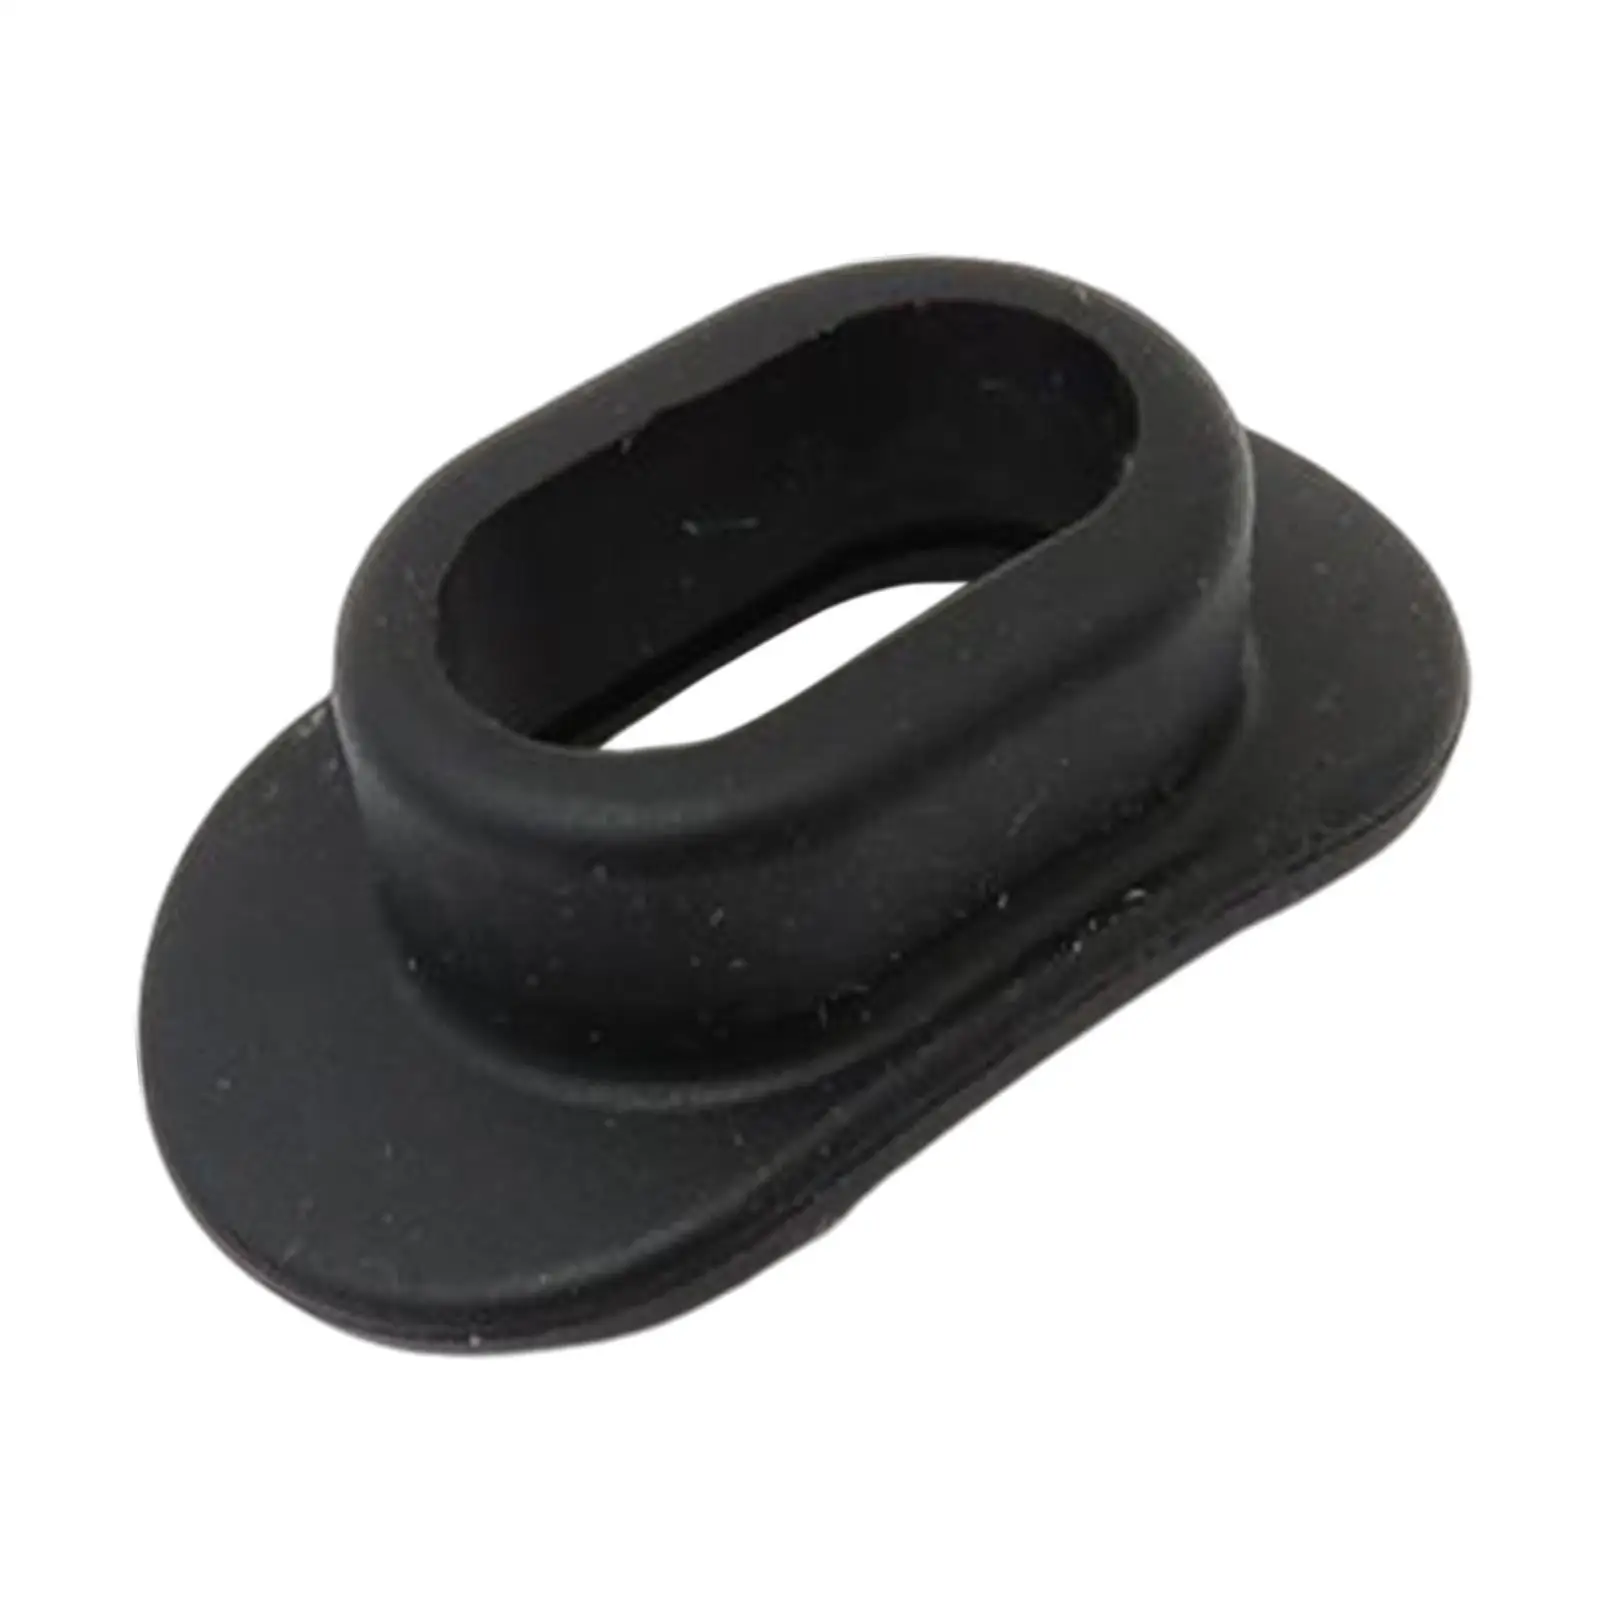 Diving K Inflator Mouthpiece Flexible for Underwater Equipment Accessories